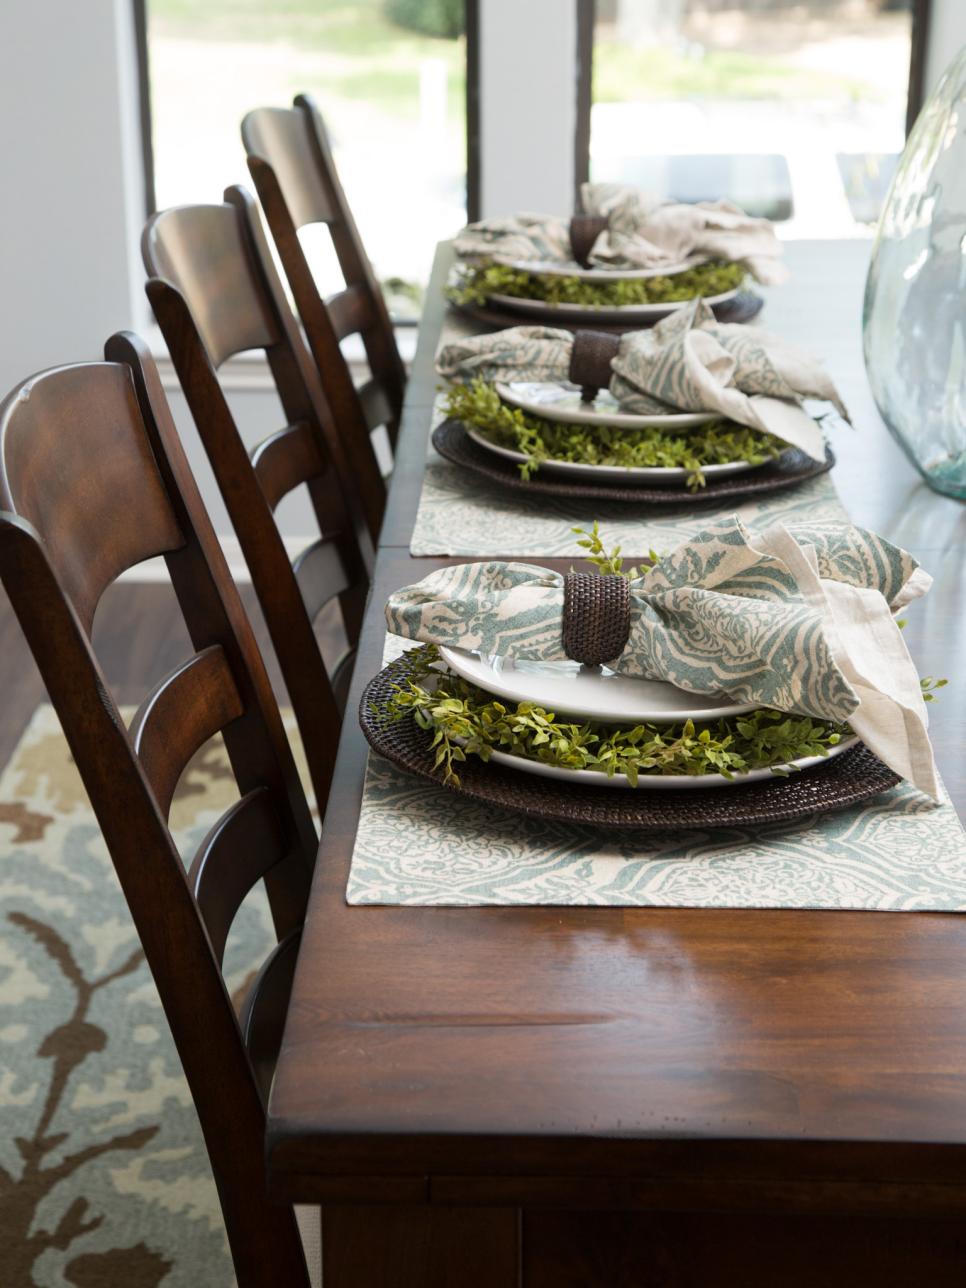 Place Setting on Dining Room Table | HGTV